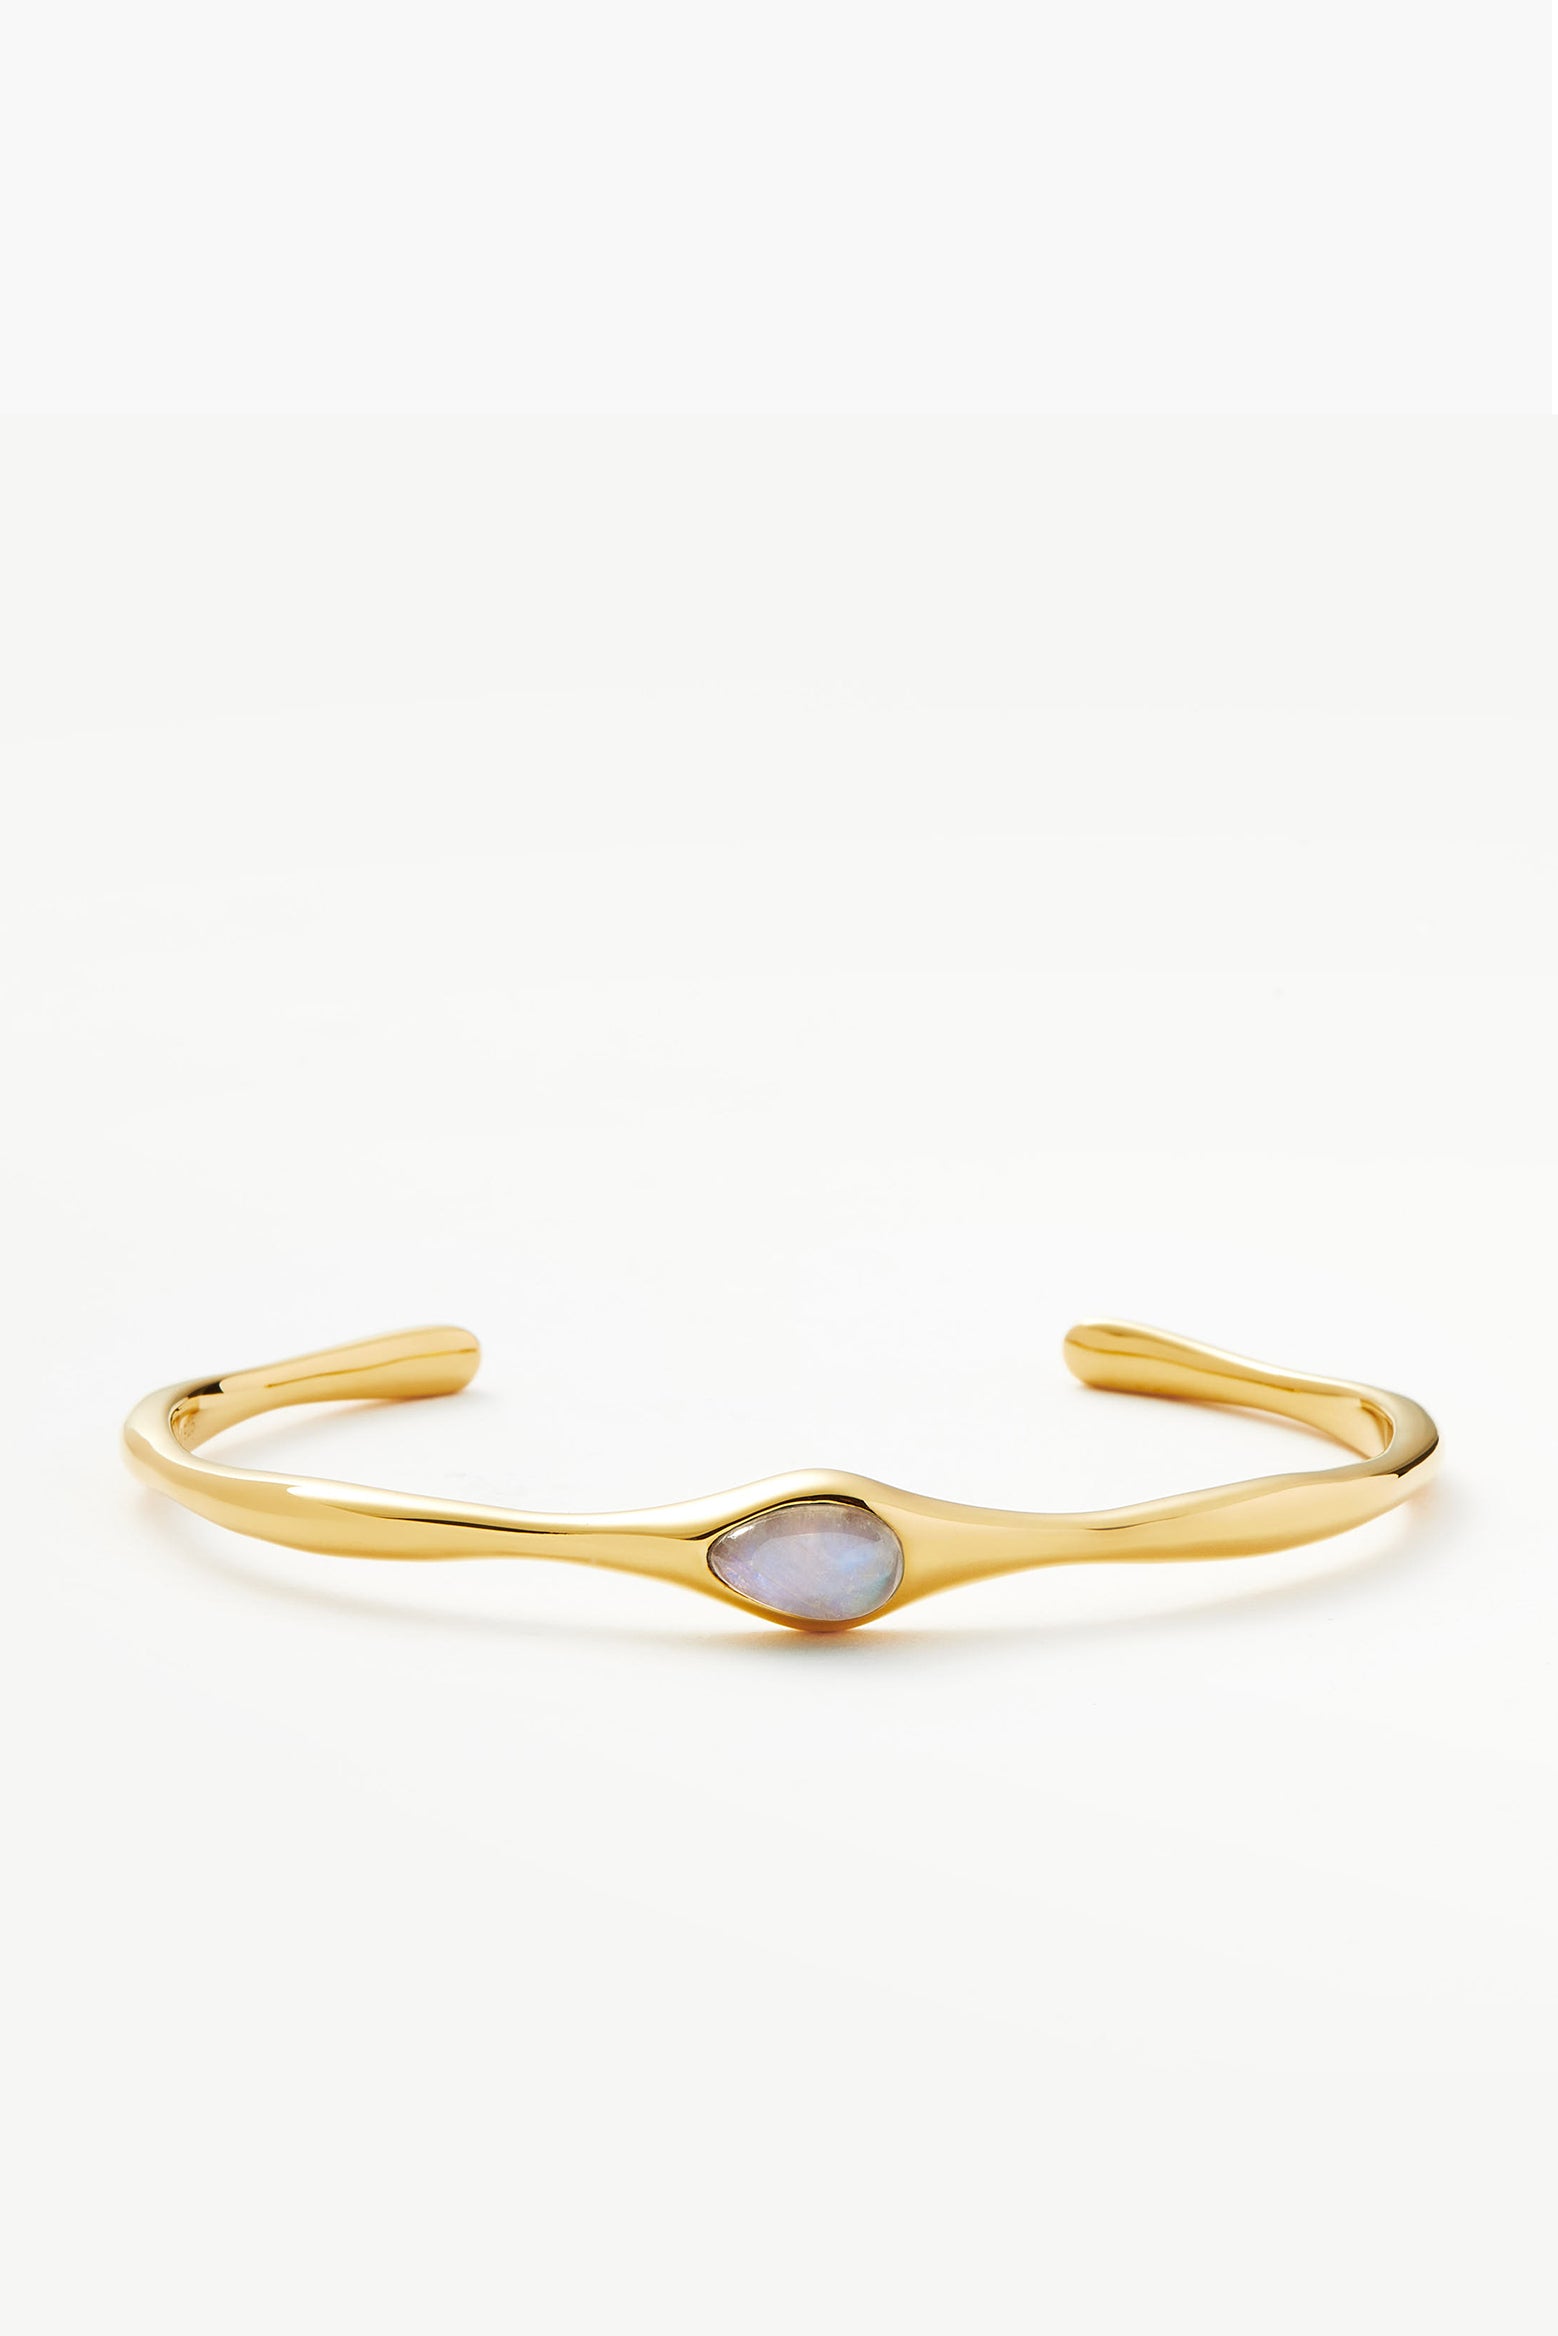 The MISSOMA Magma Gemstone Cuff Bracelet in Gold available at The New Trend. 